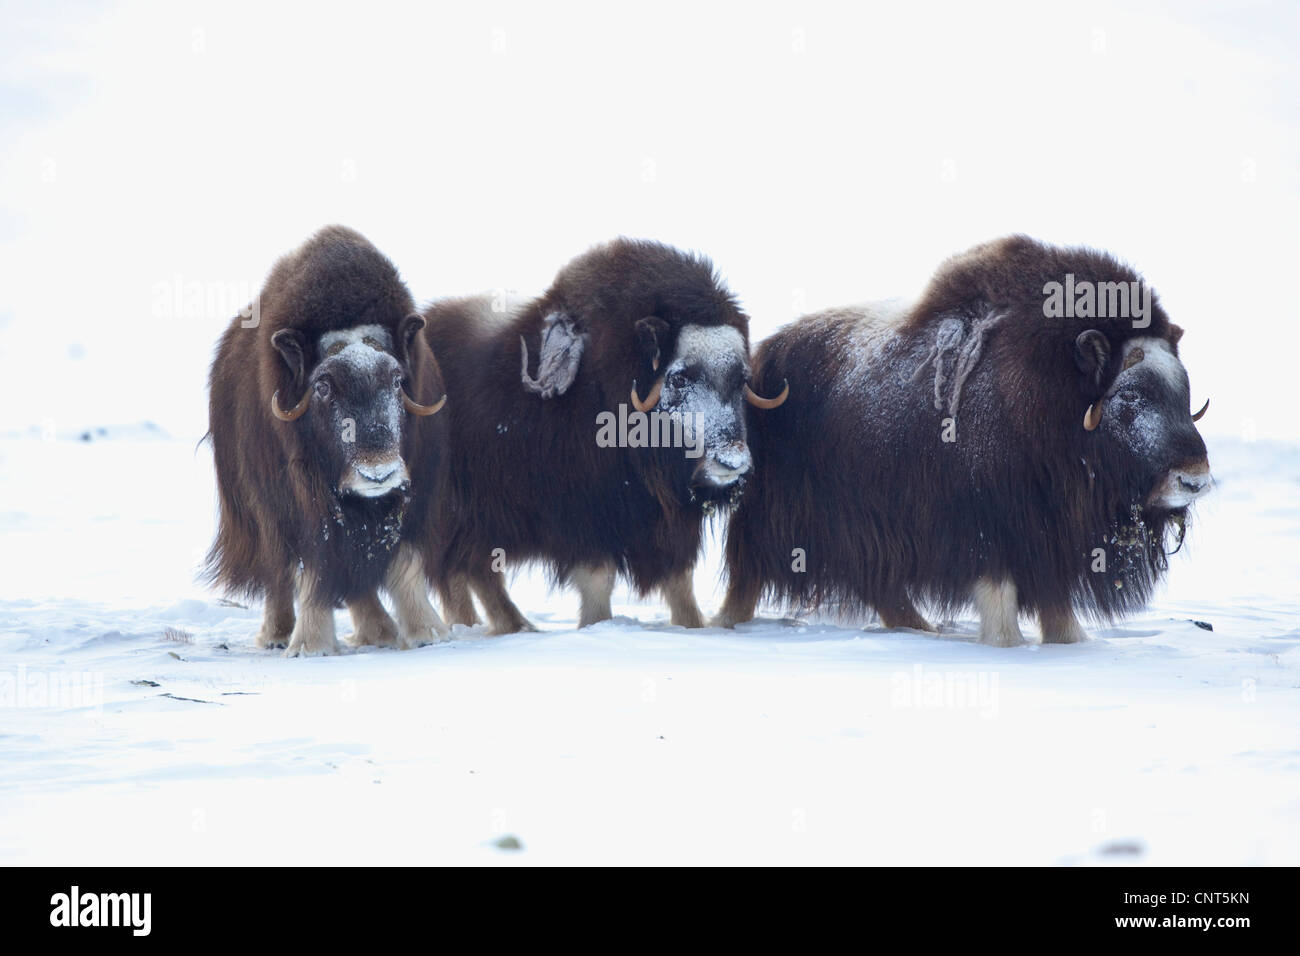 muskox (Ovibos moschatus), little herd in the snow with icy faces, Norway, Dovrefjell Sunndalsfjella National Park Stock Photo